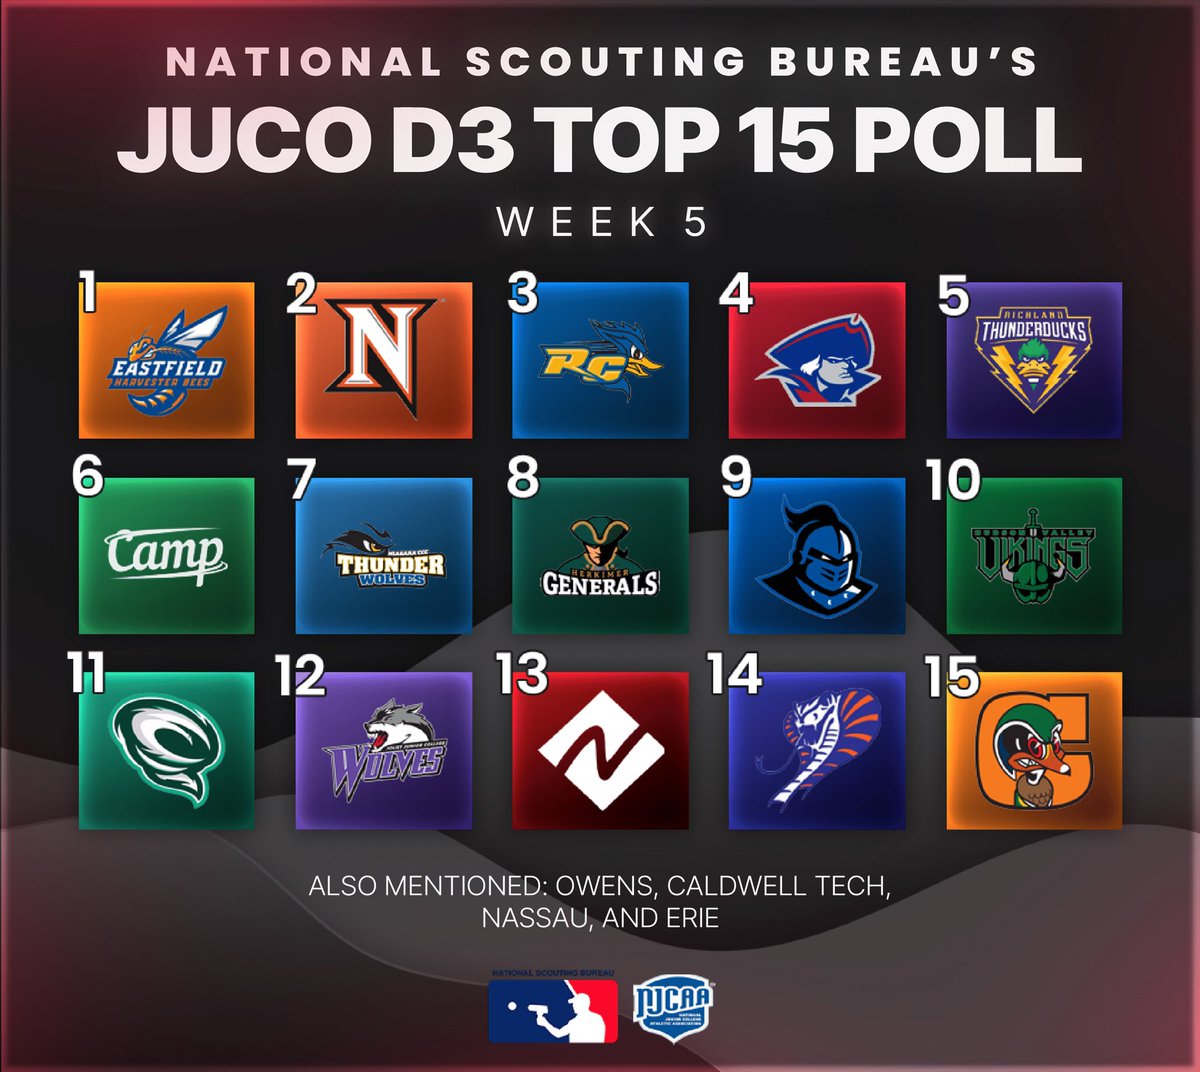 The National Scouting Bureau presents the JUCO D1, D2, and D3 Top 20 Polls🚨 We have a new #1 in JUCO D1! @reiverbaseball jumps to the top, while we see @CAC_BaseballDB9 withhold their #2 spot 🔥 We also see 2 new teams jump into our JUCO D1 Top 25: #19 | Harford CC: 29-8 🦉